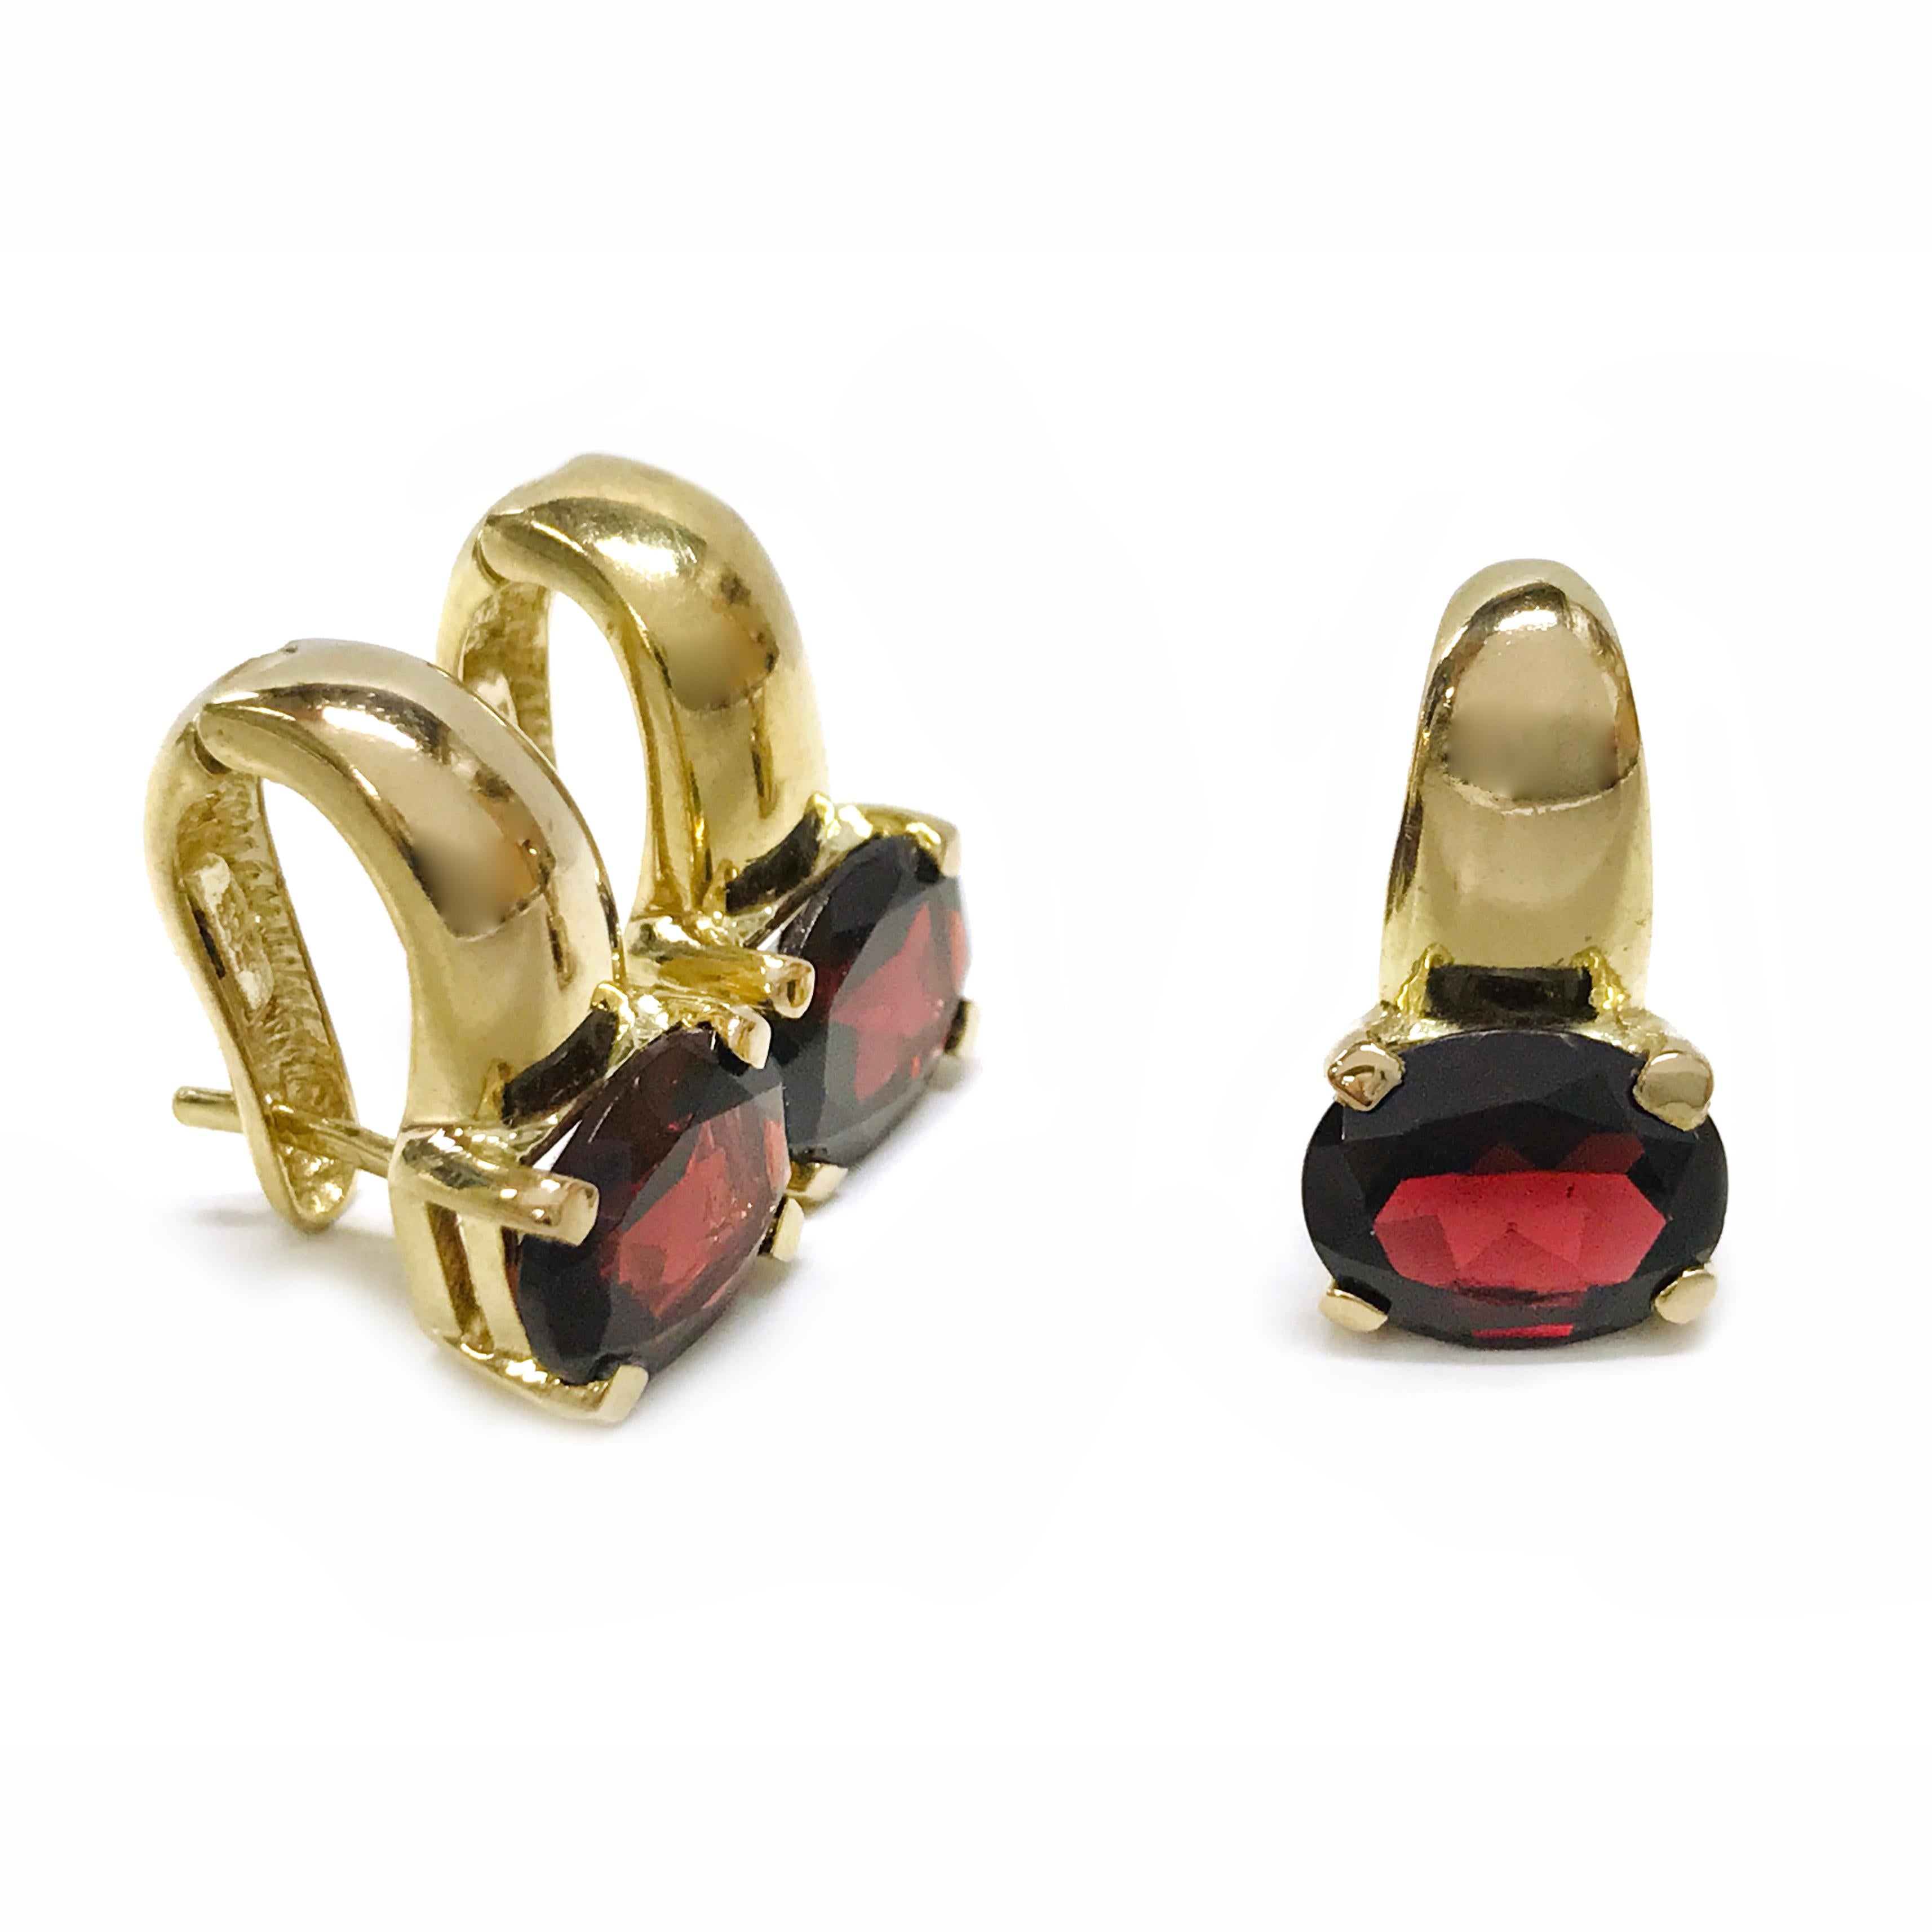 This lovely set includes Mozambique Garnet drop earrings and a matching pendant. The Mozambique Garnet has a color that is warm, deep red, and similar to that of a Ruby.
14 Karat Garnet Drop Earrings and Pendant. The earrings feature an oval